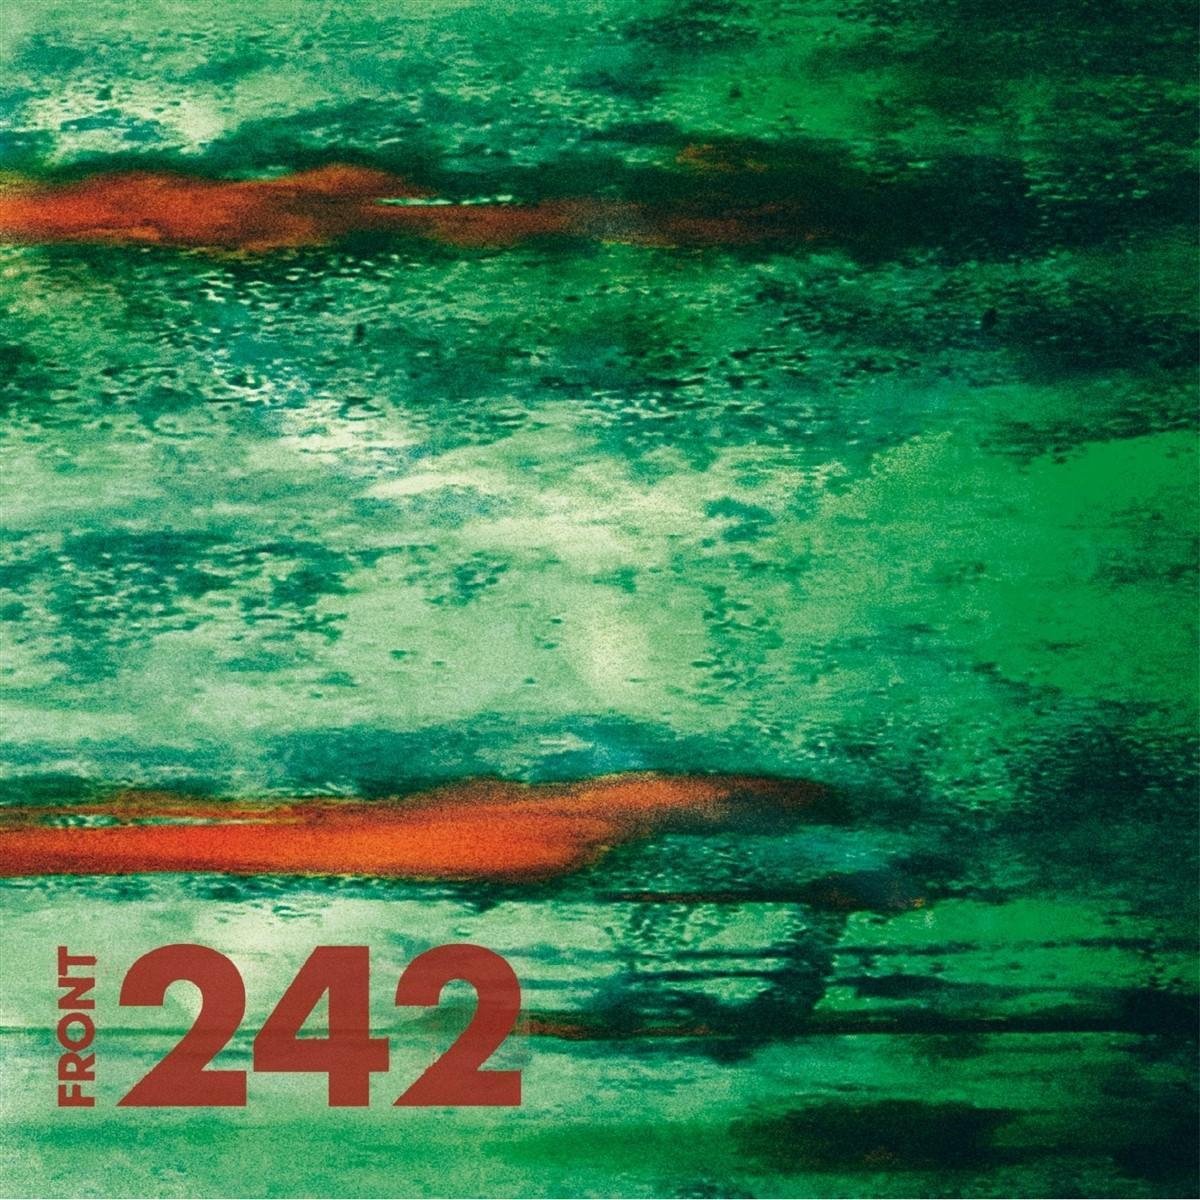 Front 242 - USA 91 (CD) - Front 242